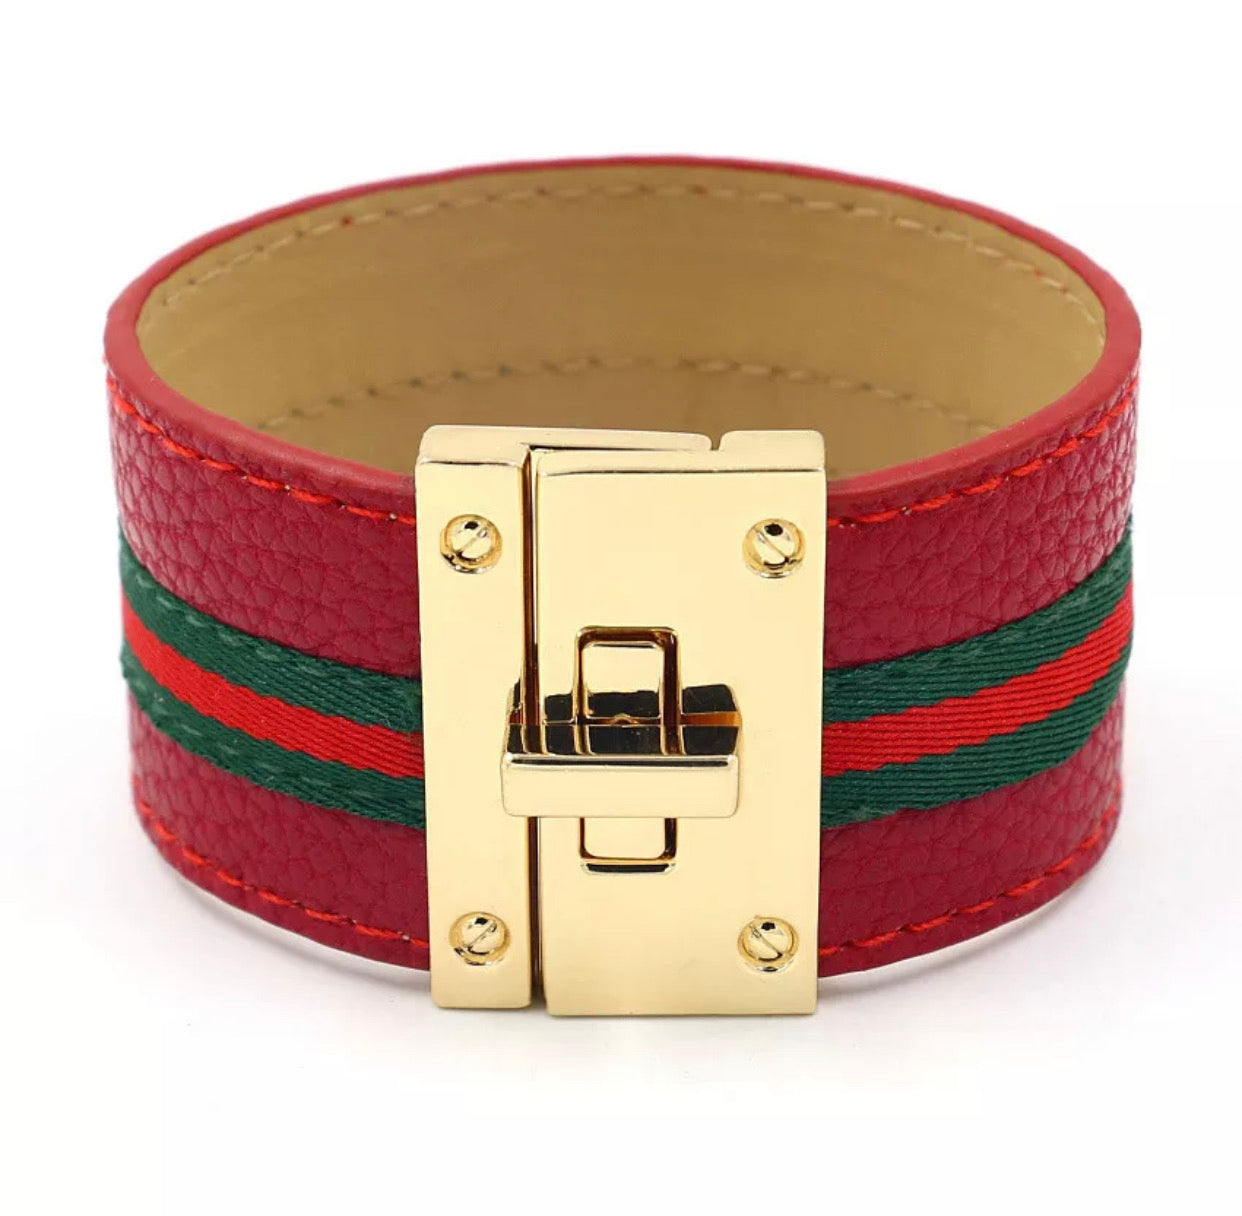 Red Leather Cuff Bracelet with a Golden Buckle